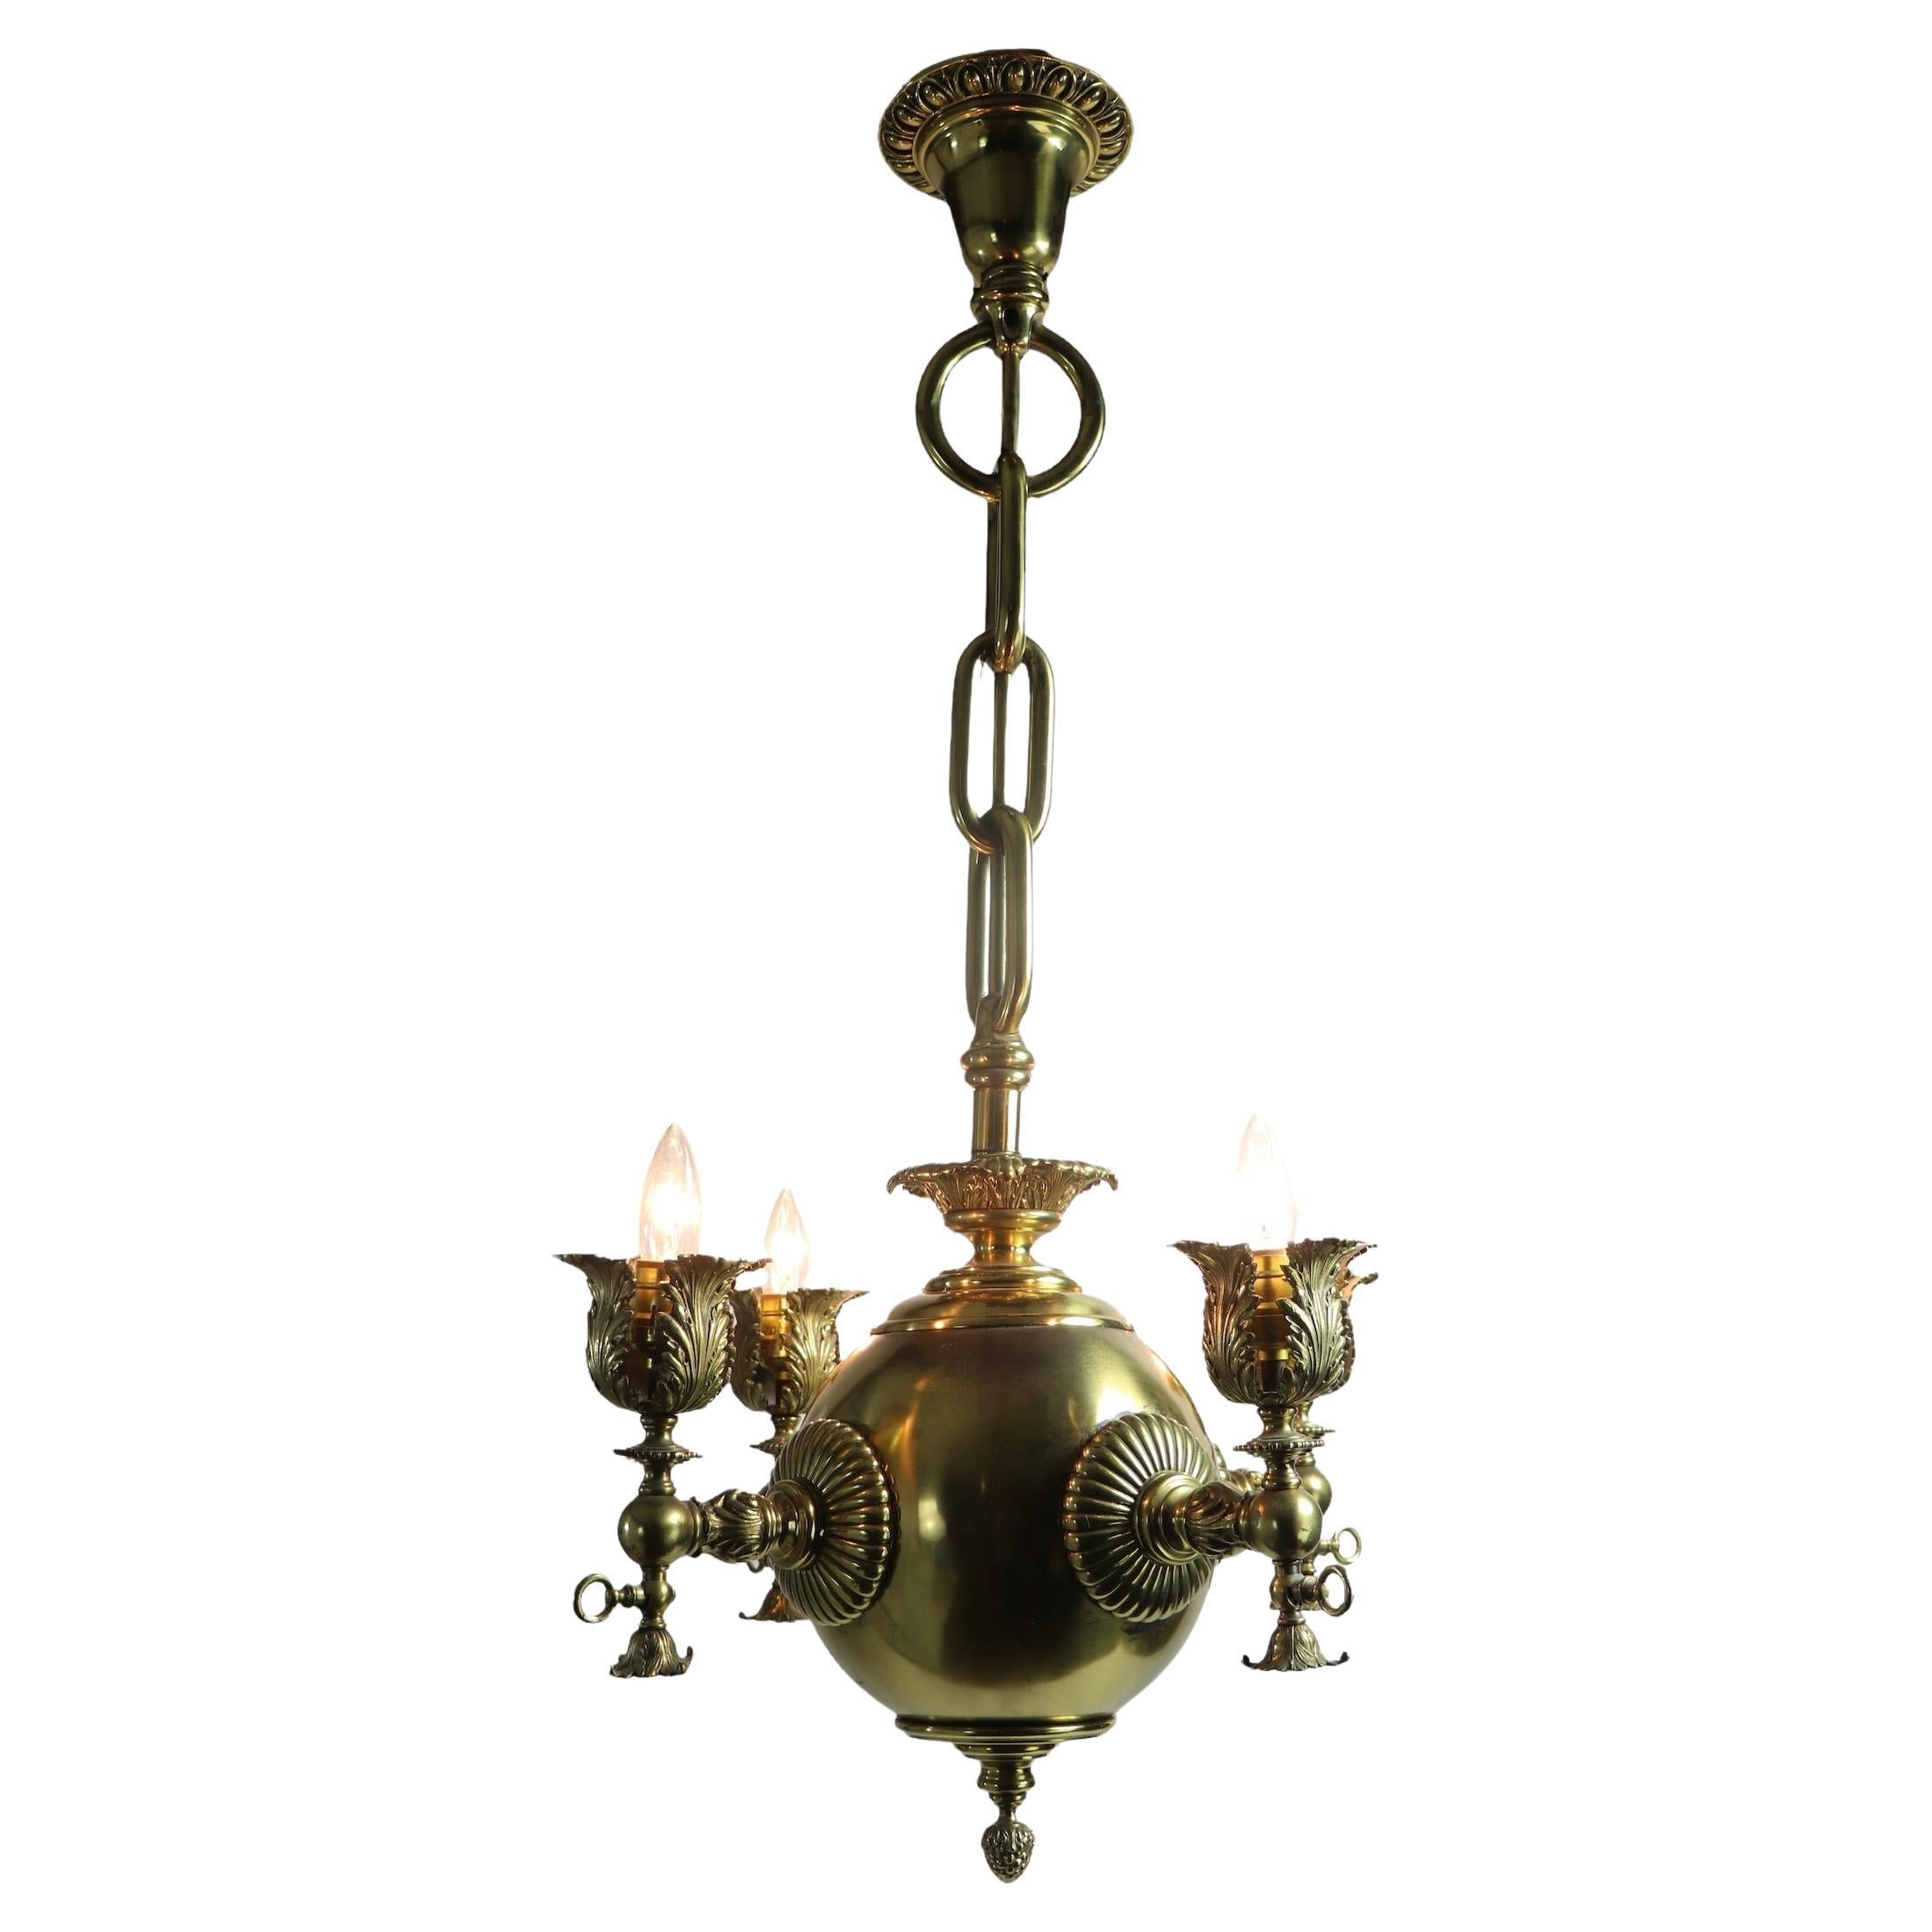 Brass Four Light Electrified Gas Fixture 19th C Made in Usa For Sale